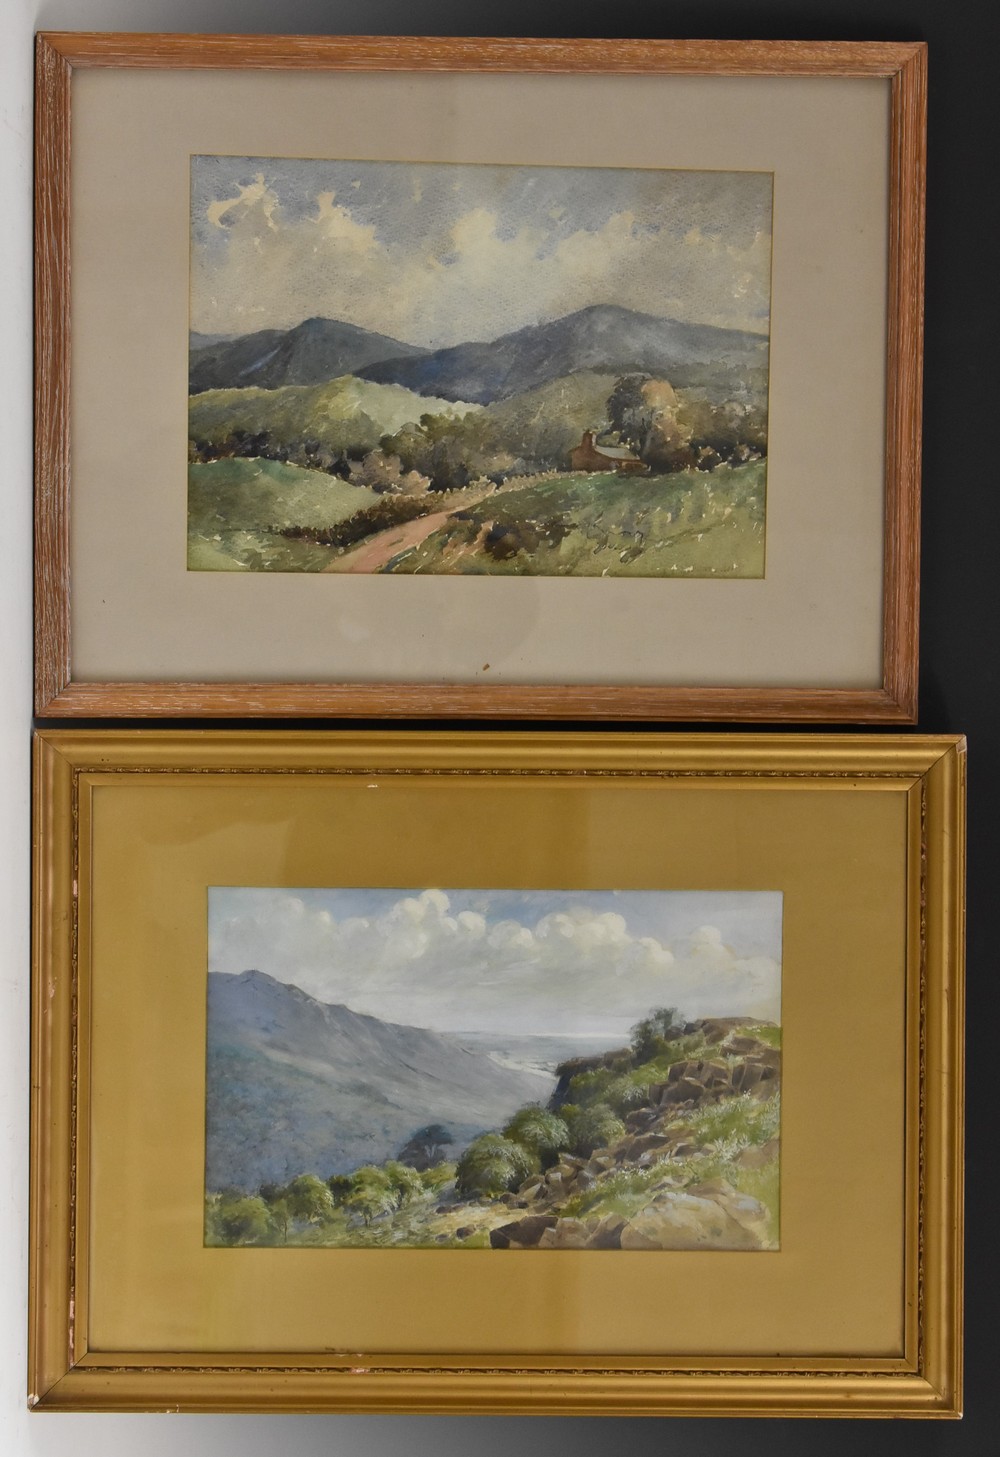 Early 20th century English School, A View towards the Moors, watercolour, 22.